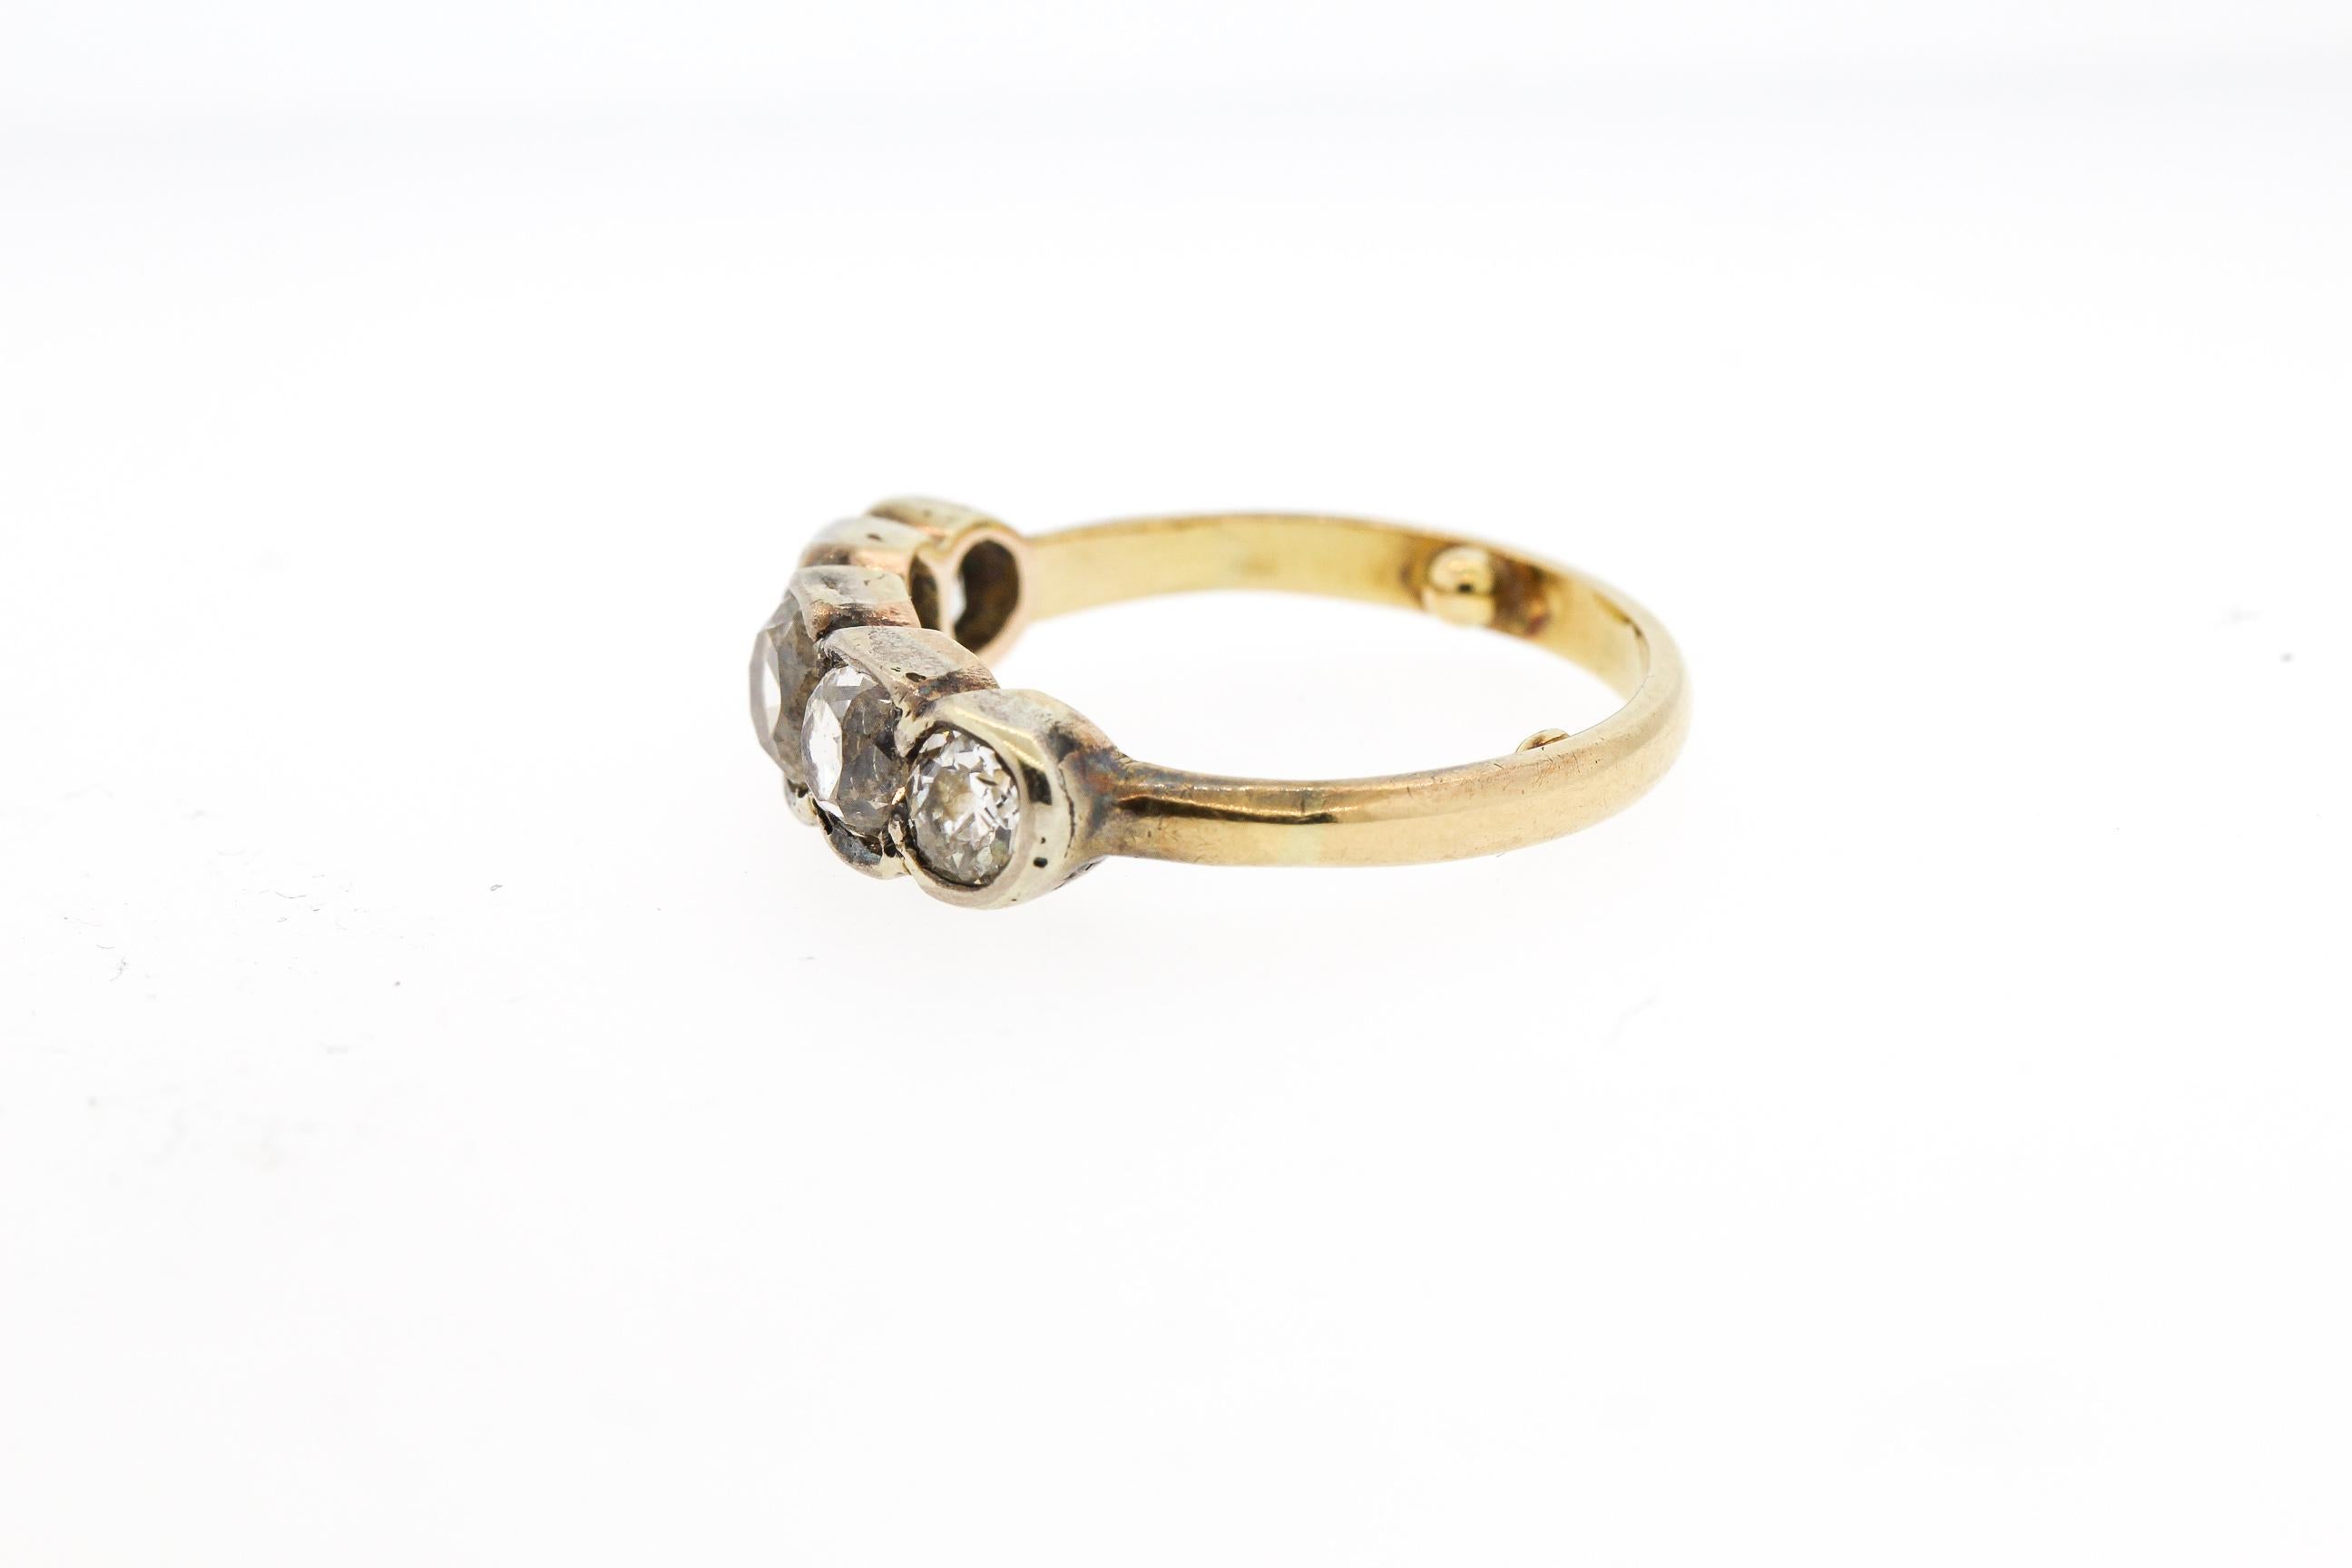 Victorian silver and gold five stone diamond ring set with Old Mine Cut diamonds. The ring is made in 18k and dates to about 1850. The ring is gold, though the top part is topped in silver. The five stones weigh approximately 1.65 carats total. The